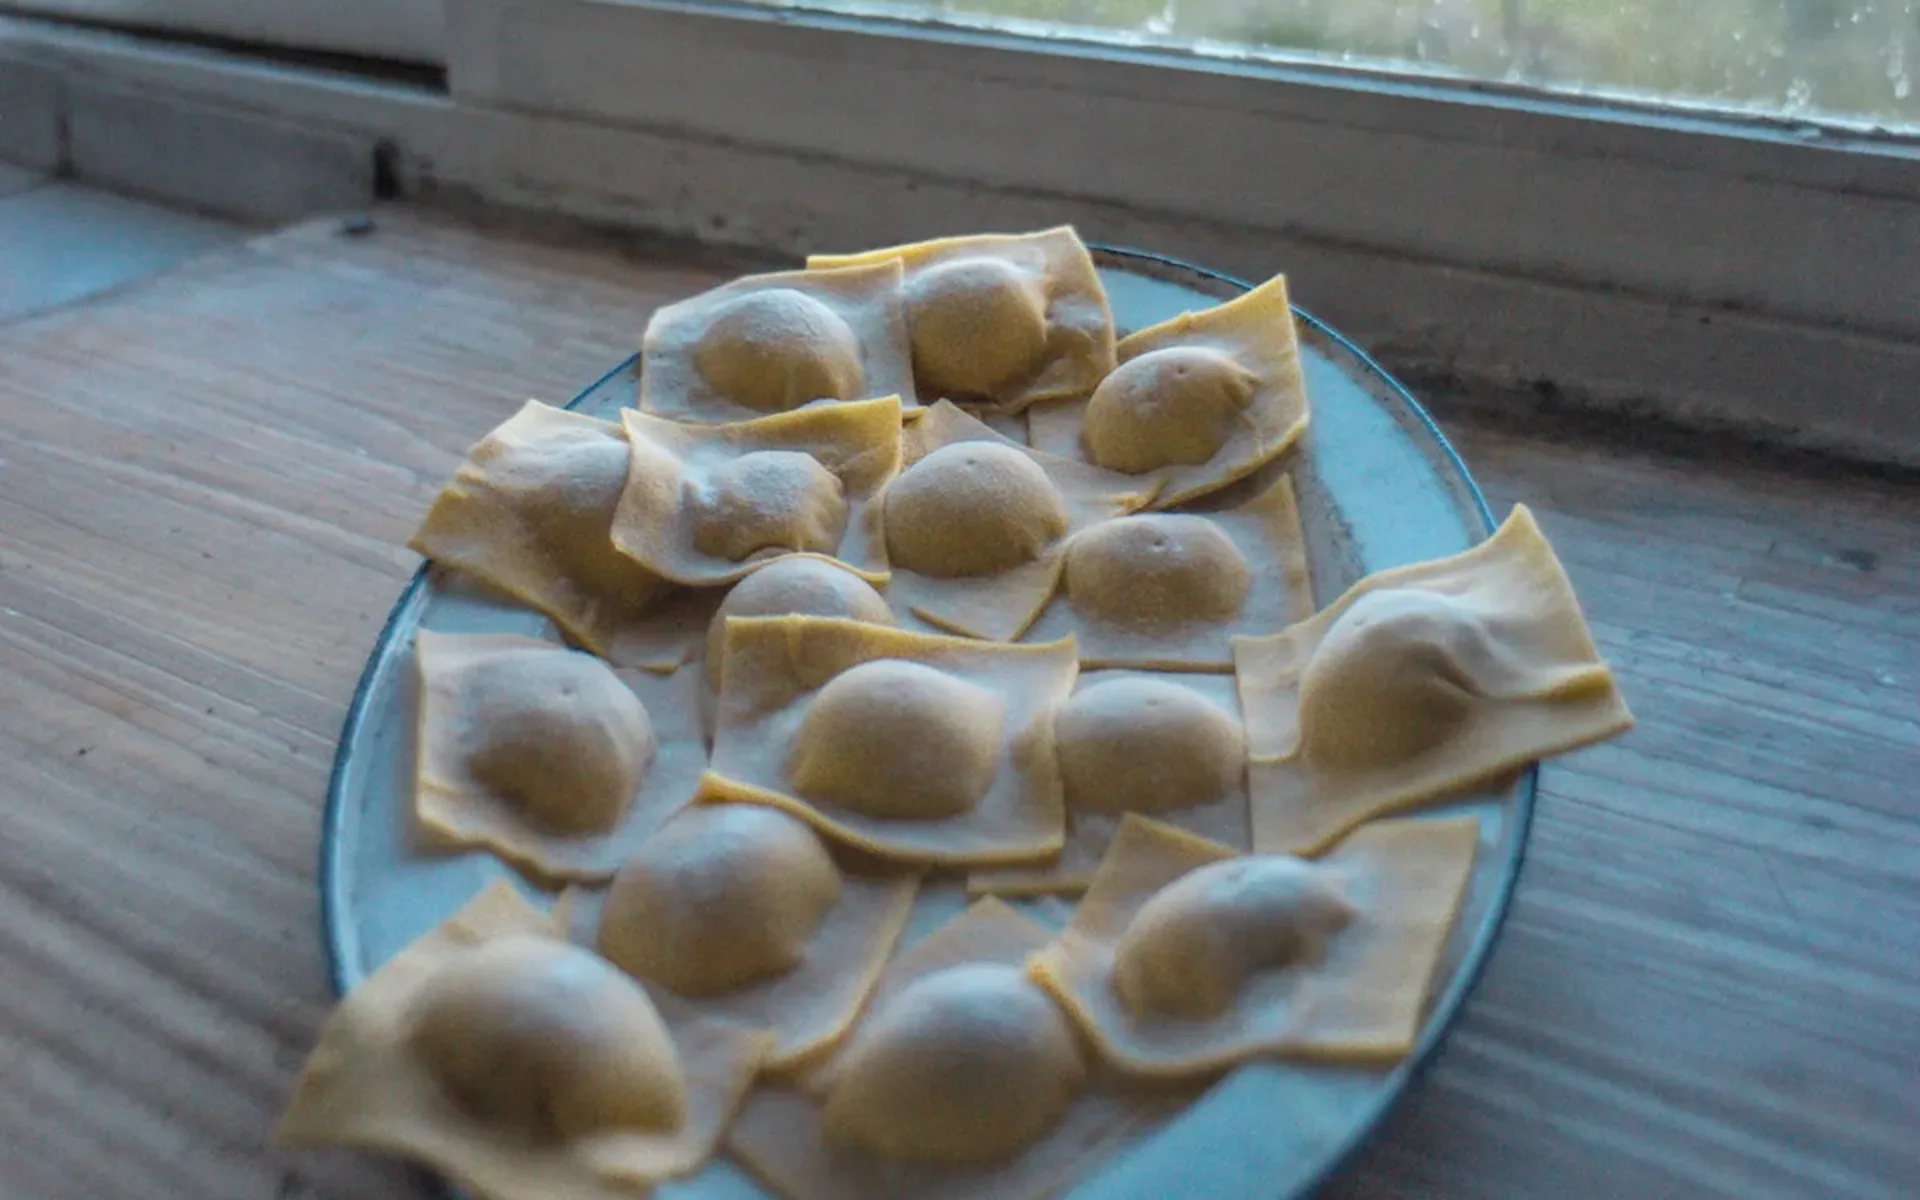 A delicious dish of freshly-made ravioli is laid out on a plate.